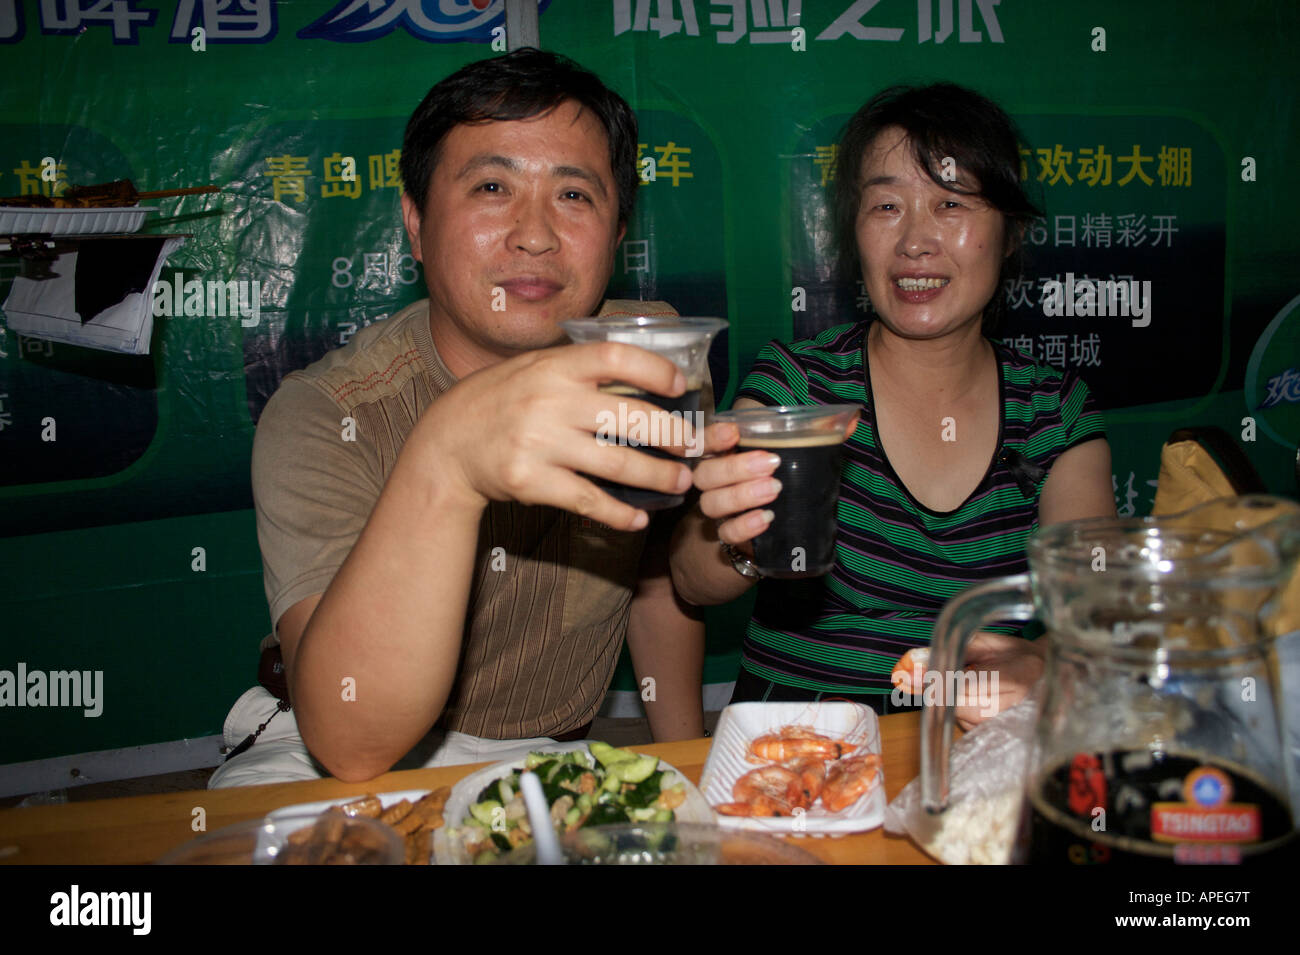 A couple drink beer and eat snacks at the Tsingtao beer festival Qingdao Shandong China Stock Photo